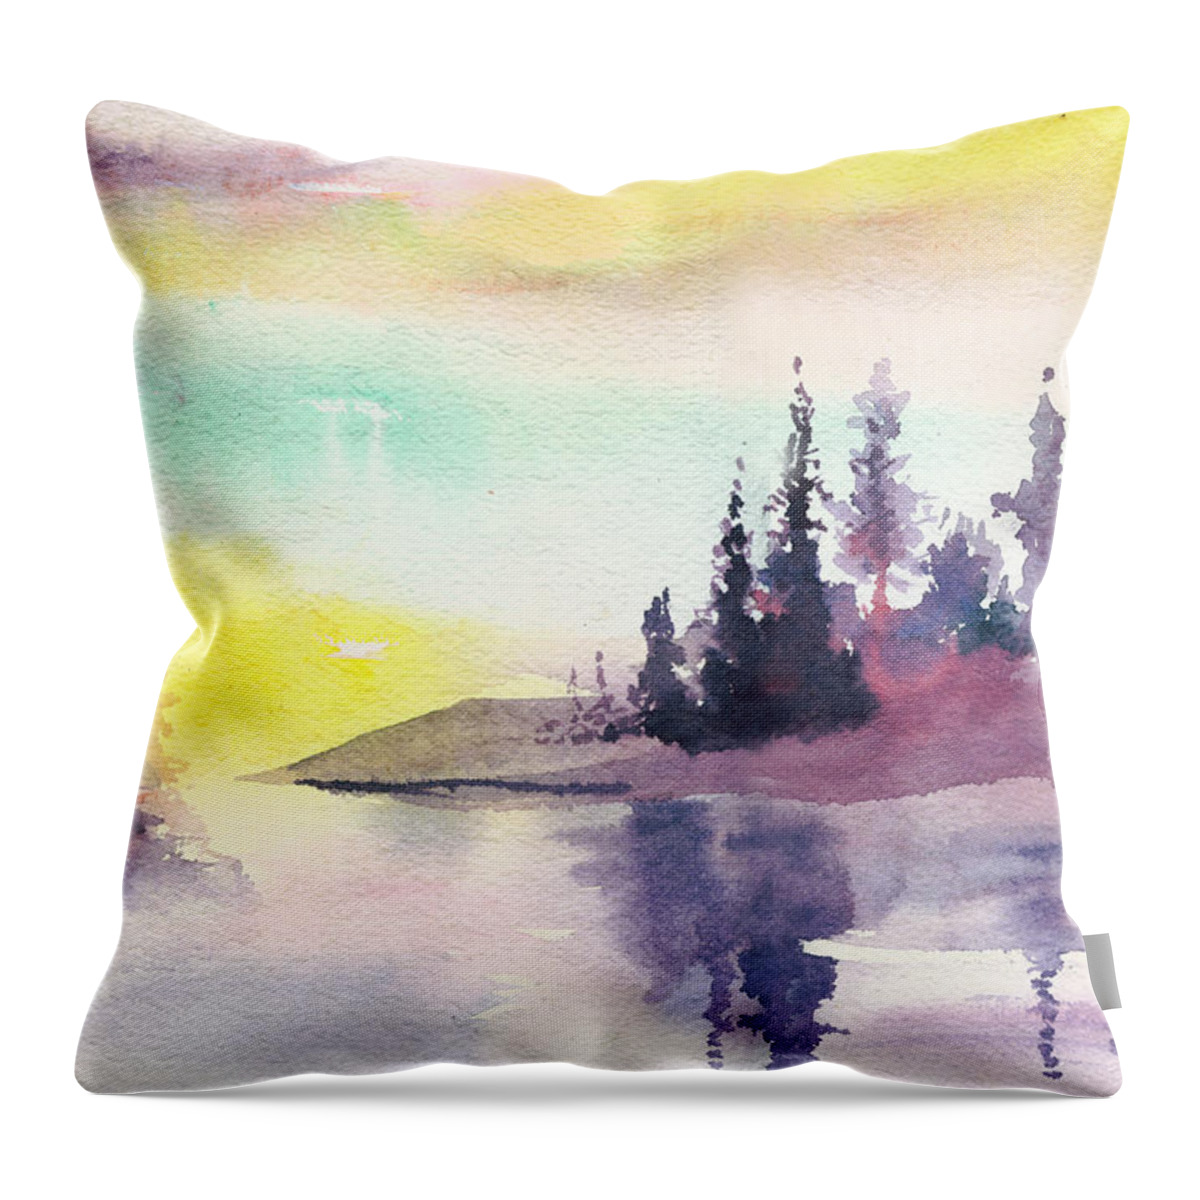 River Throw Pillow featuring the painting Light n River by Anil Nene